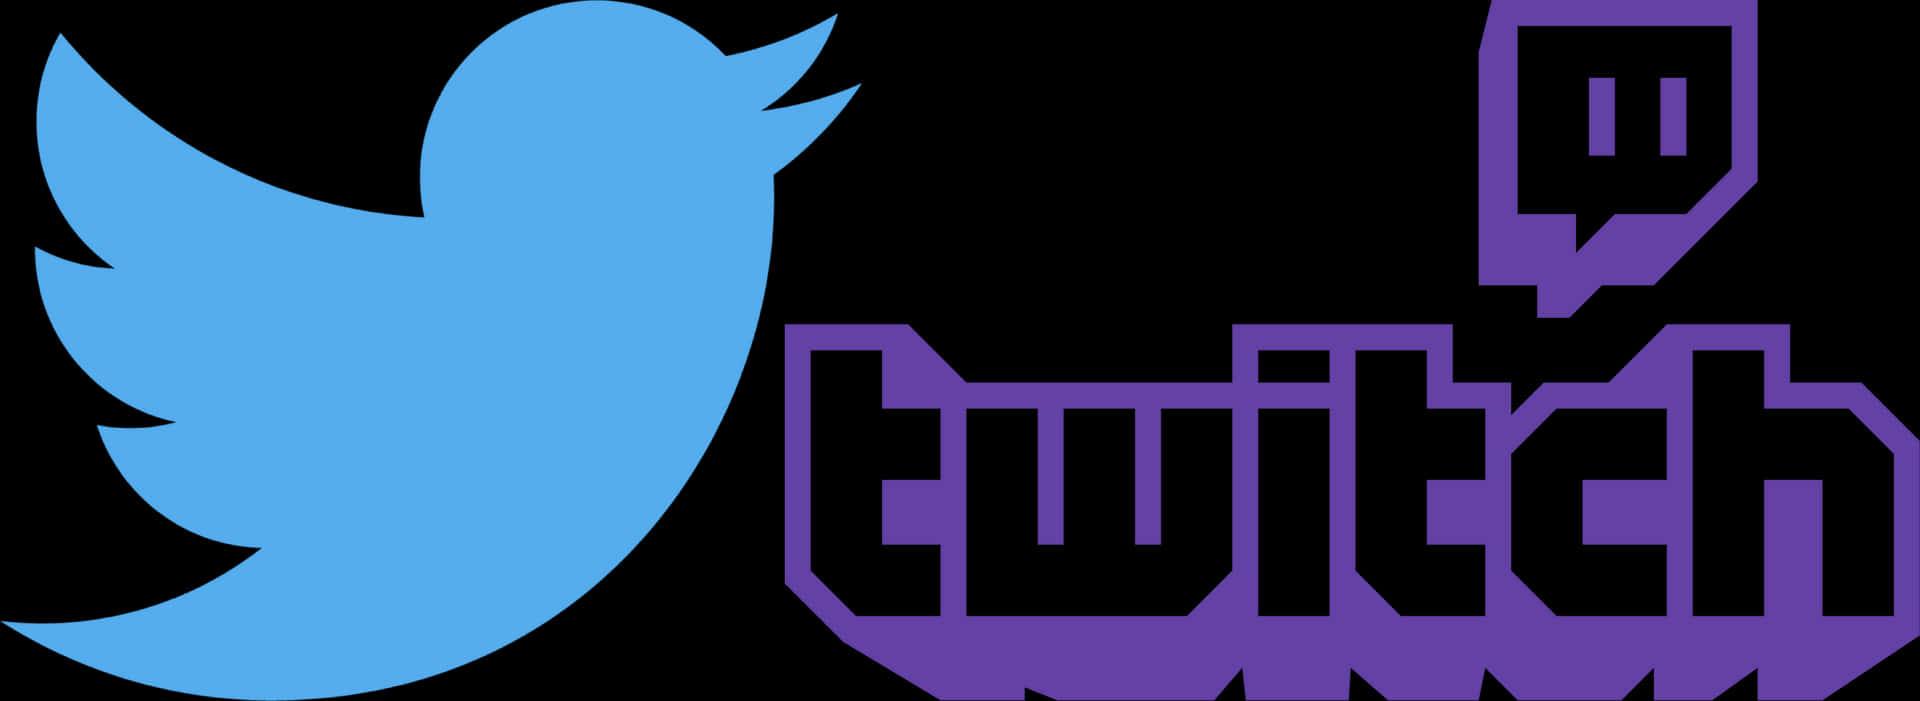 Twitter Twitch Logos Combined PNG